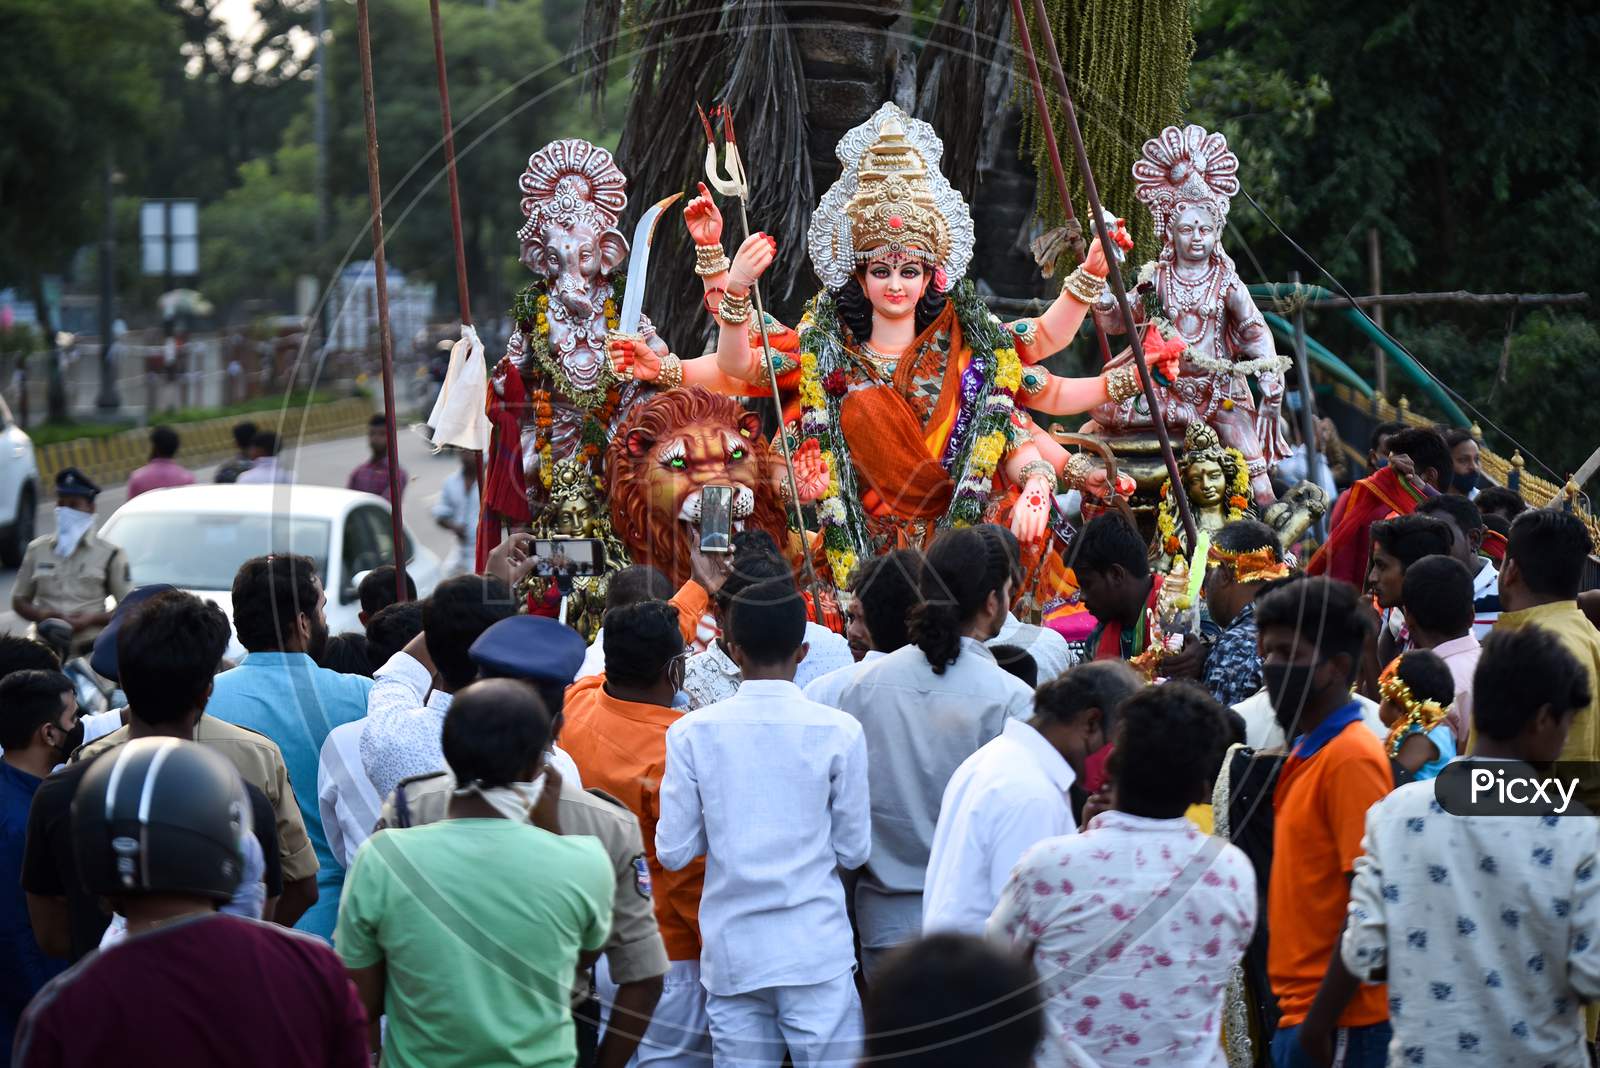 Devotees bring Idols of Goddess Durga for immersion in Hussain Sagar on the last day of Durga Puja/Dasara/Navratri in Hyderabad on October 26, 2020.